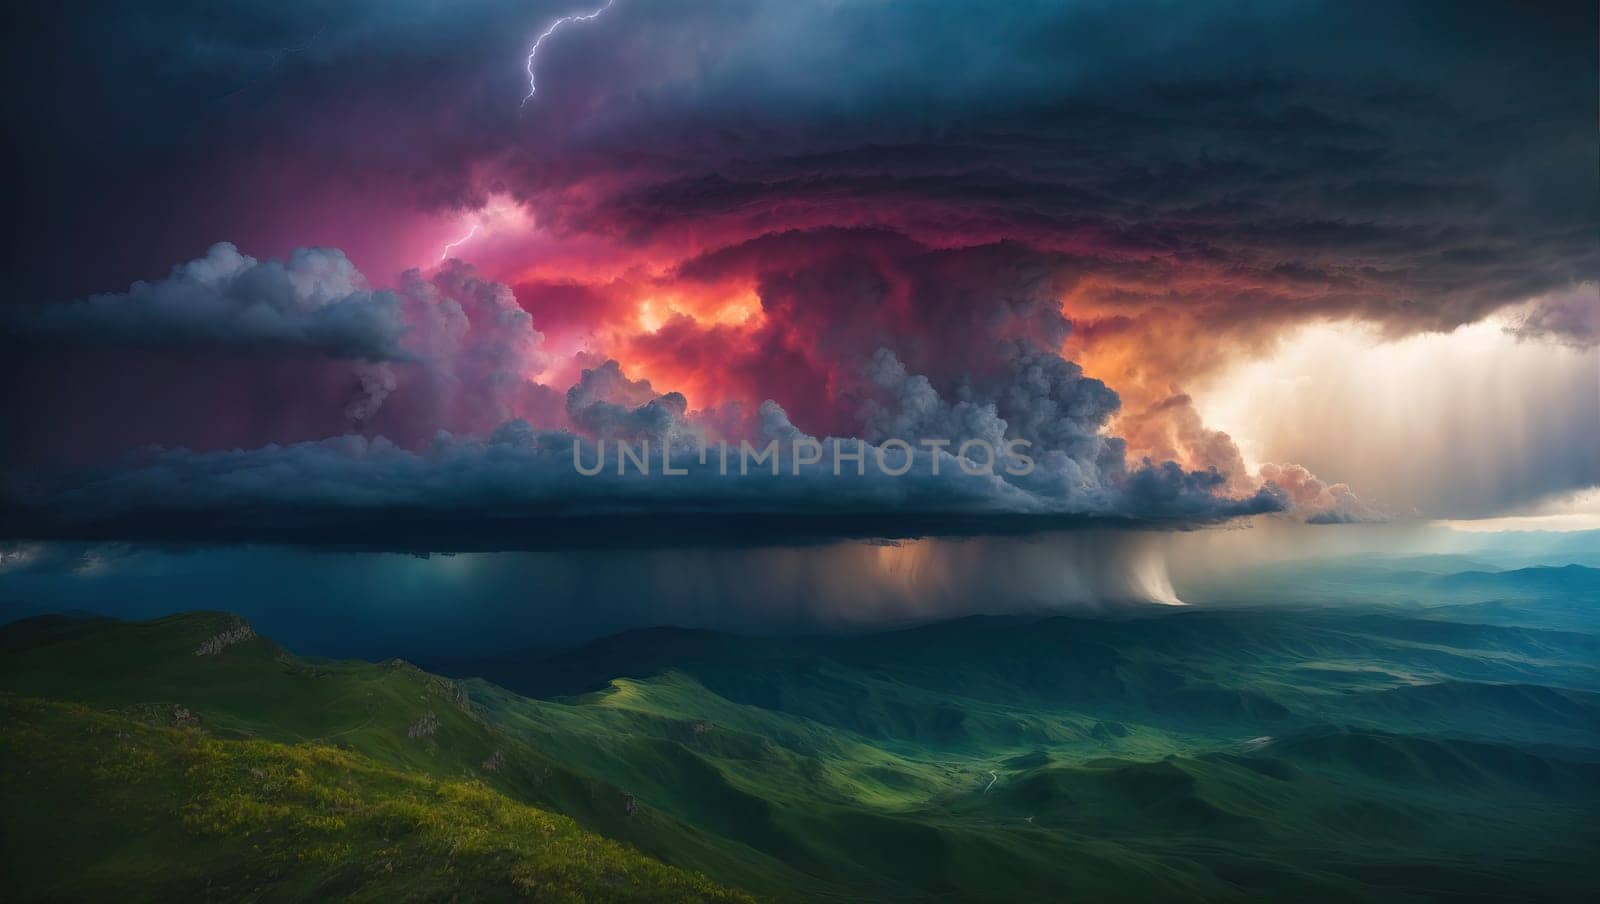 Epic dramatic storm cell as seen from high on a mountain. AI generated